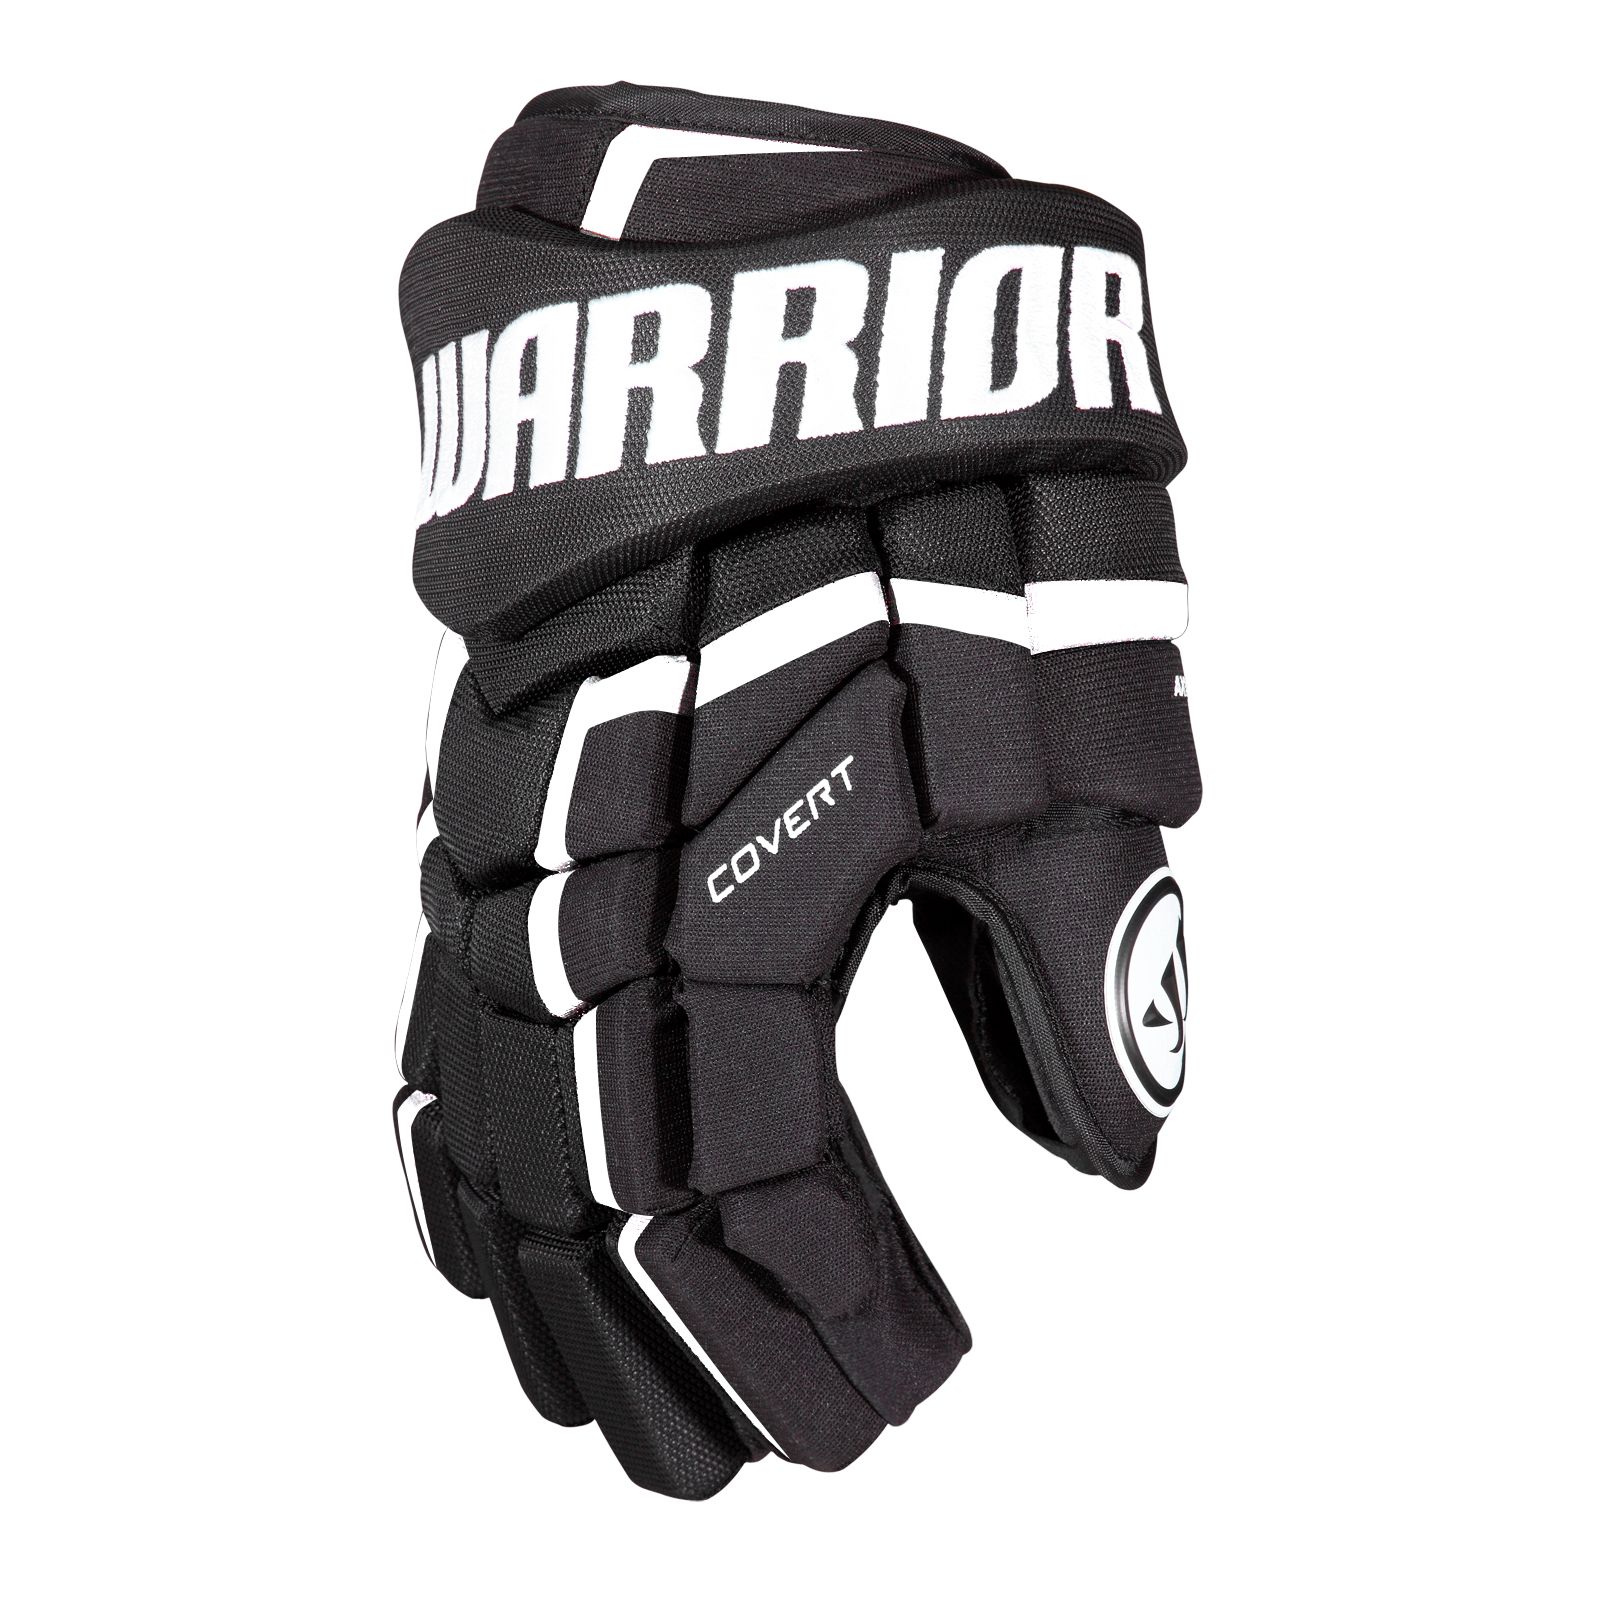 Covert QRL4 Int. Glove , Black with White image number 0